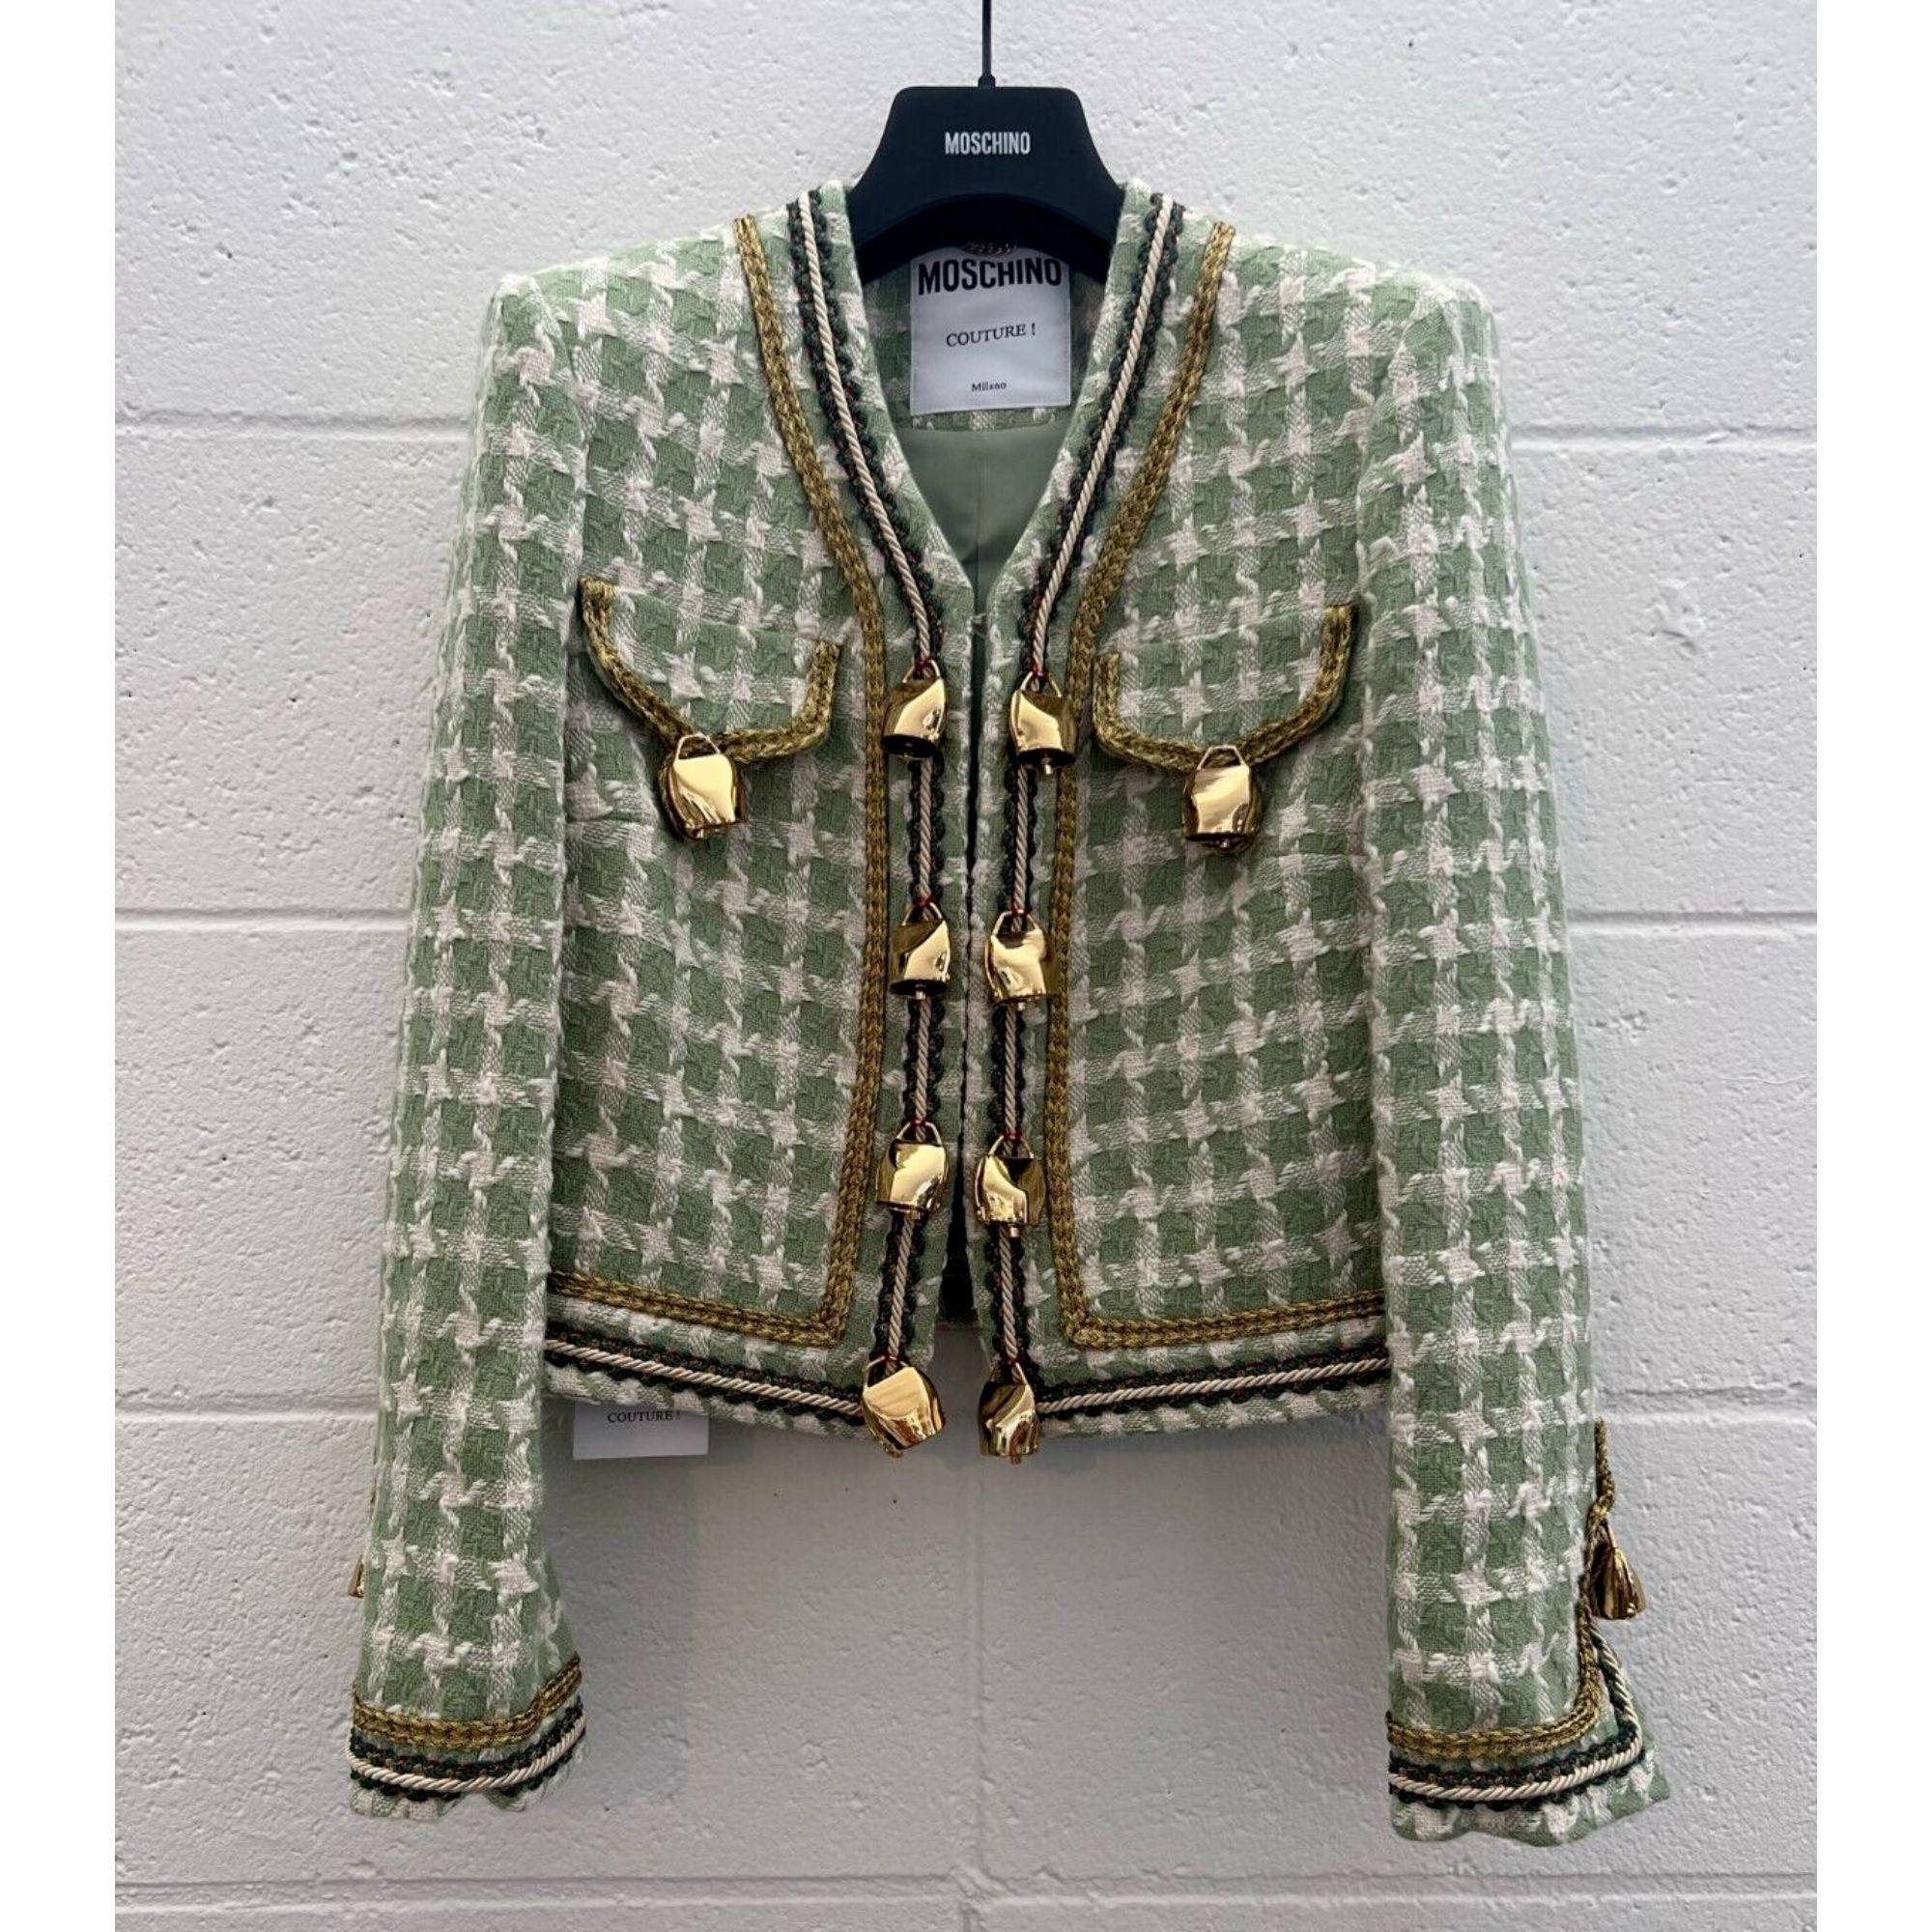 AW21 Moschino Couture Wool Cotton Jacket with Cow Bells by Jeremy Scott In New Condition For Sale In Palm Springs, CA